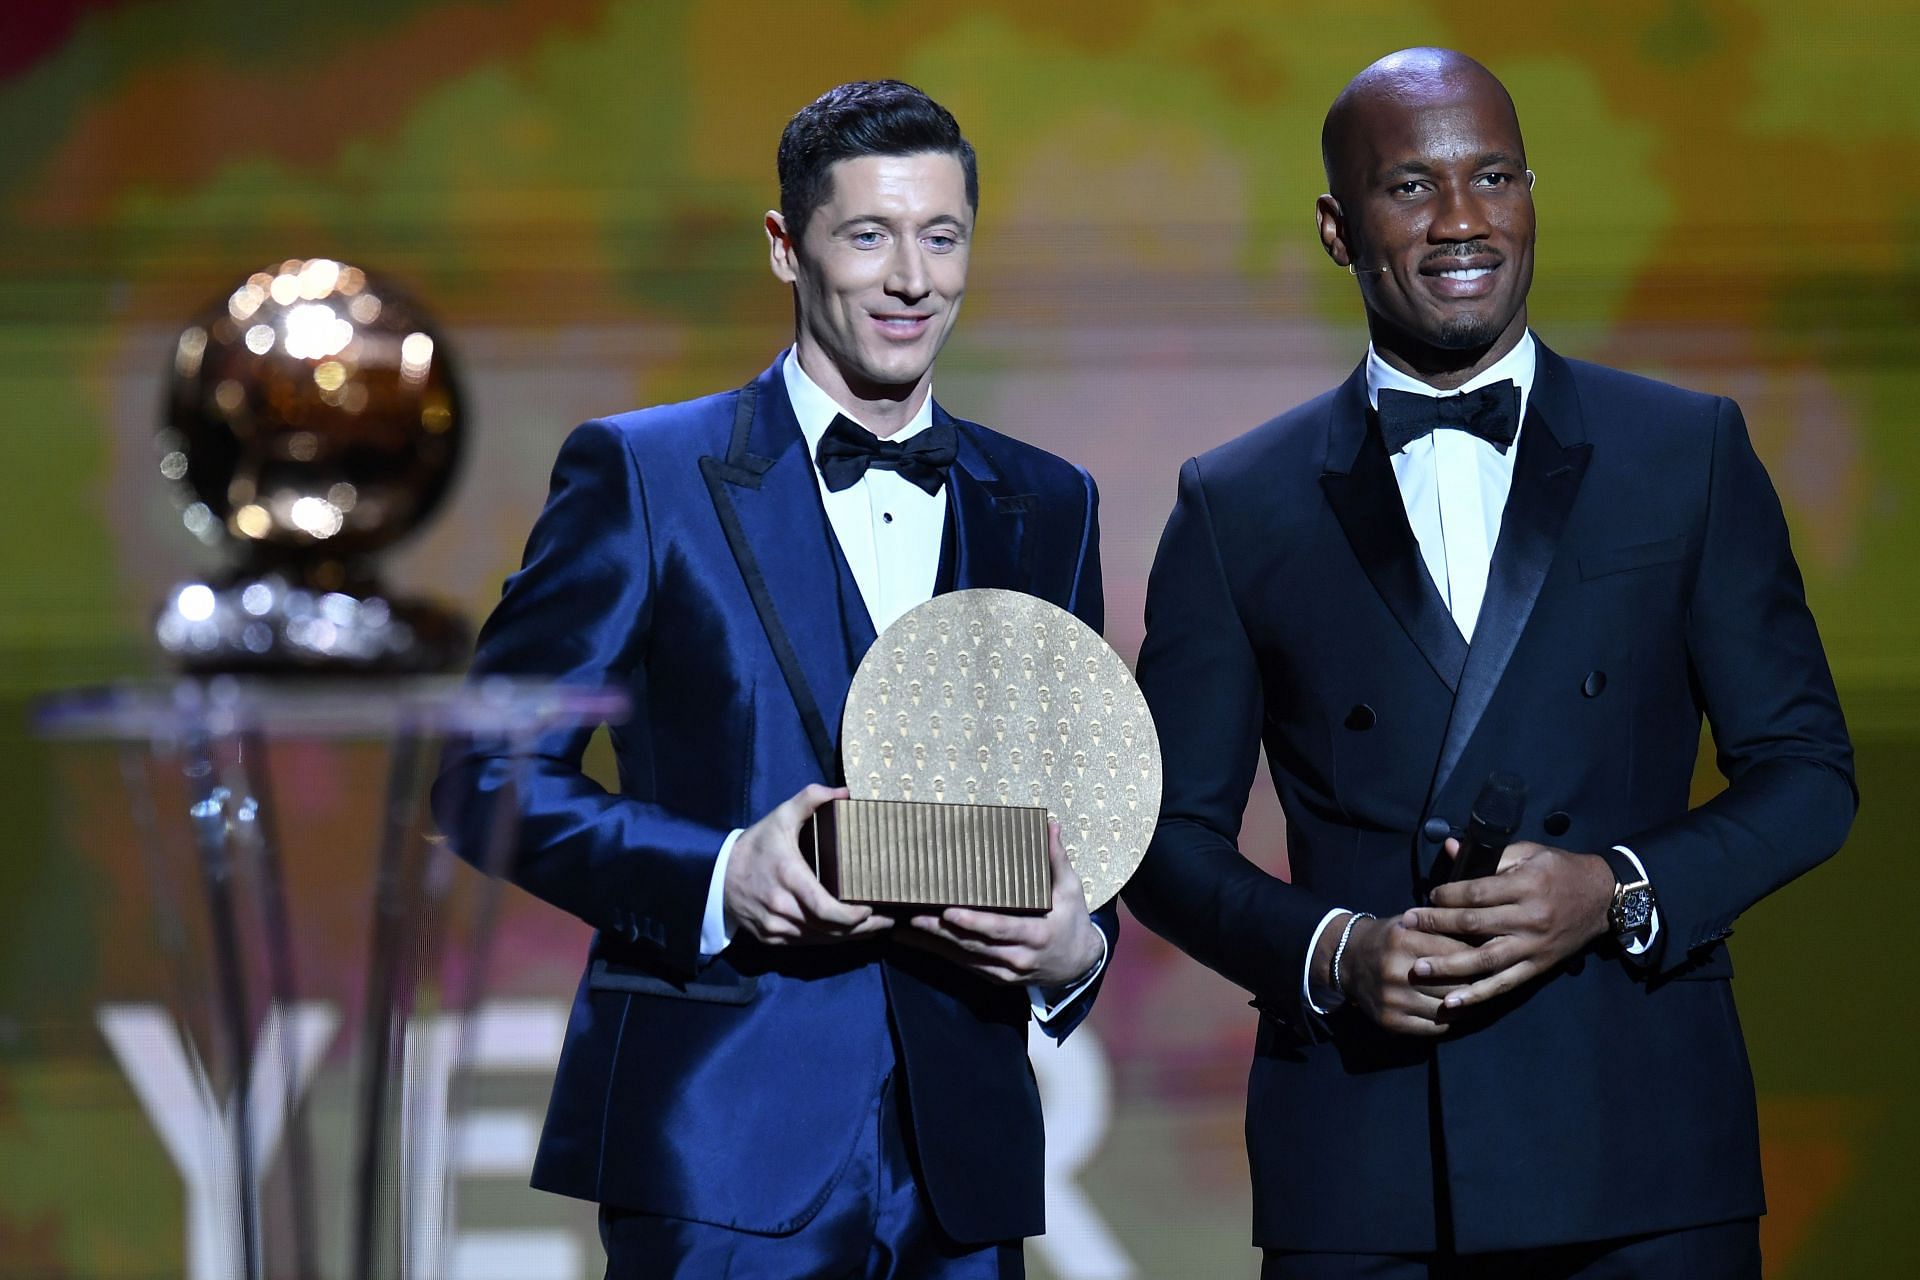 Lewandowski received the Striker of the Year award for his exploits with Bayern Munich and Poland